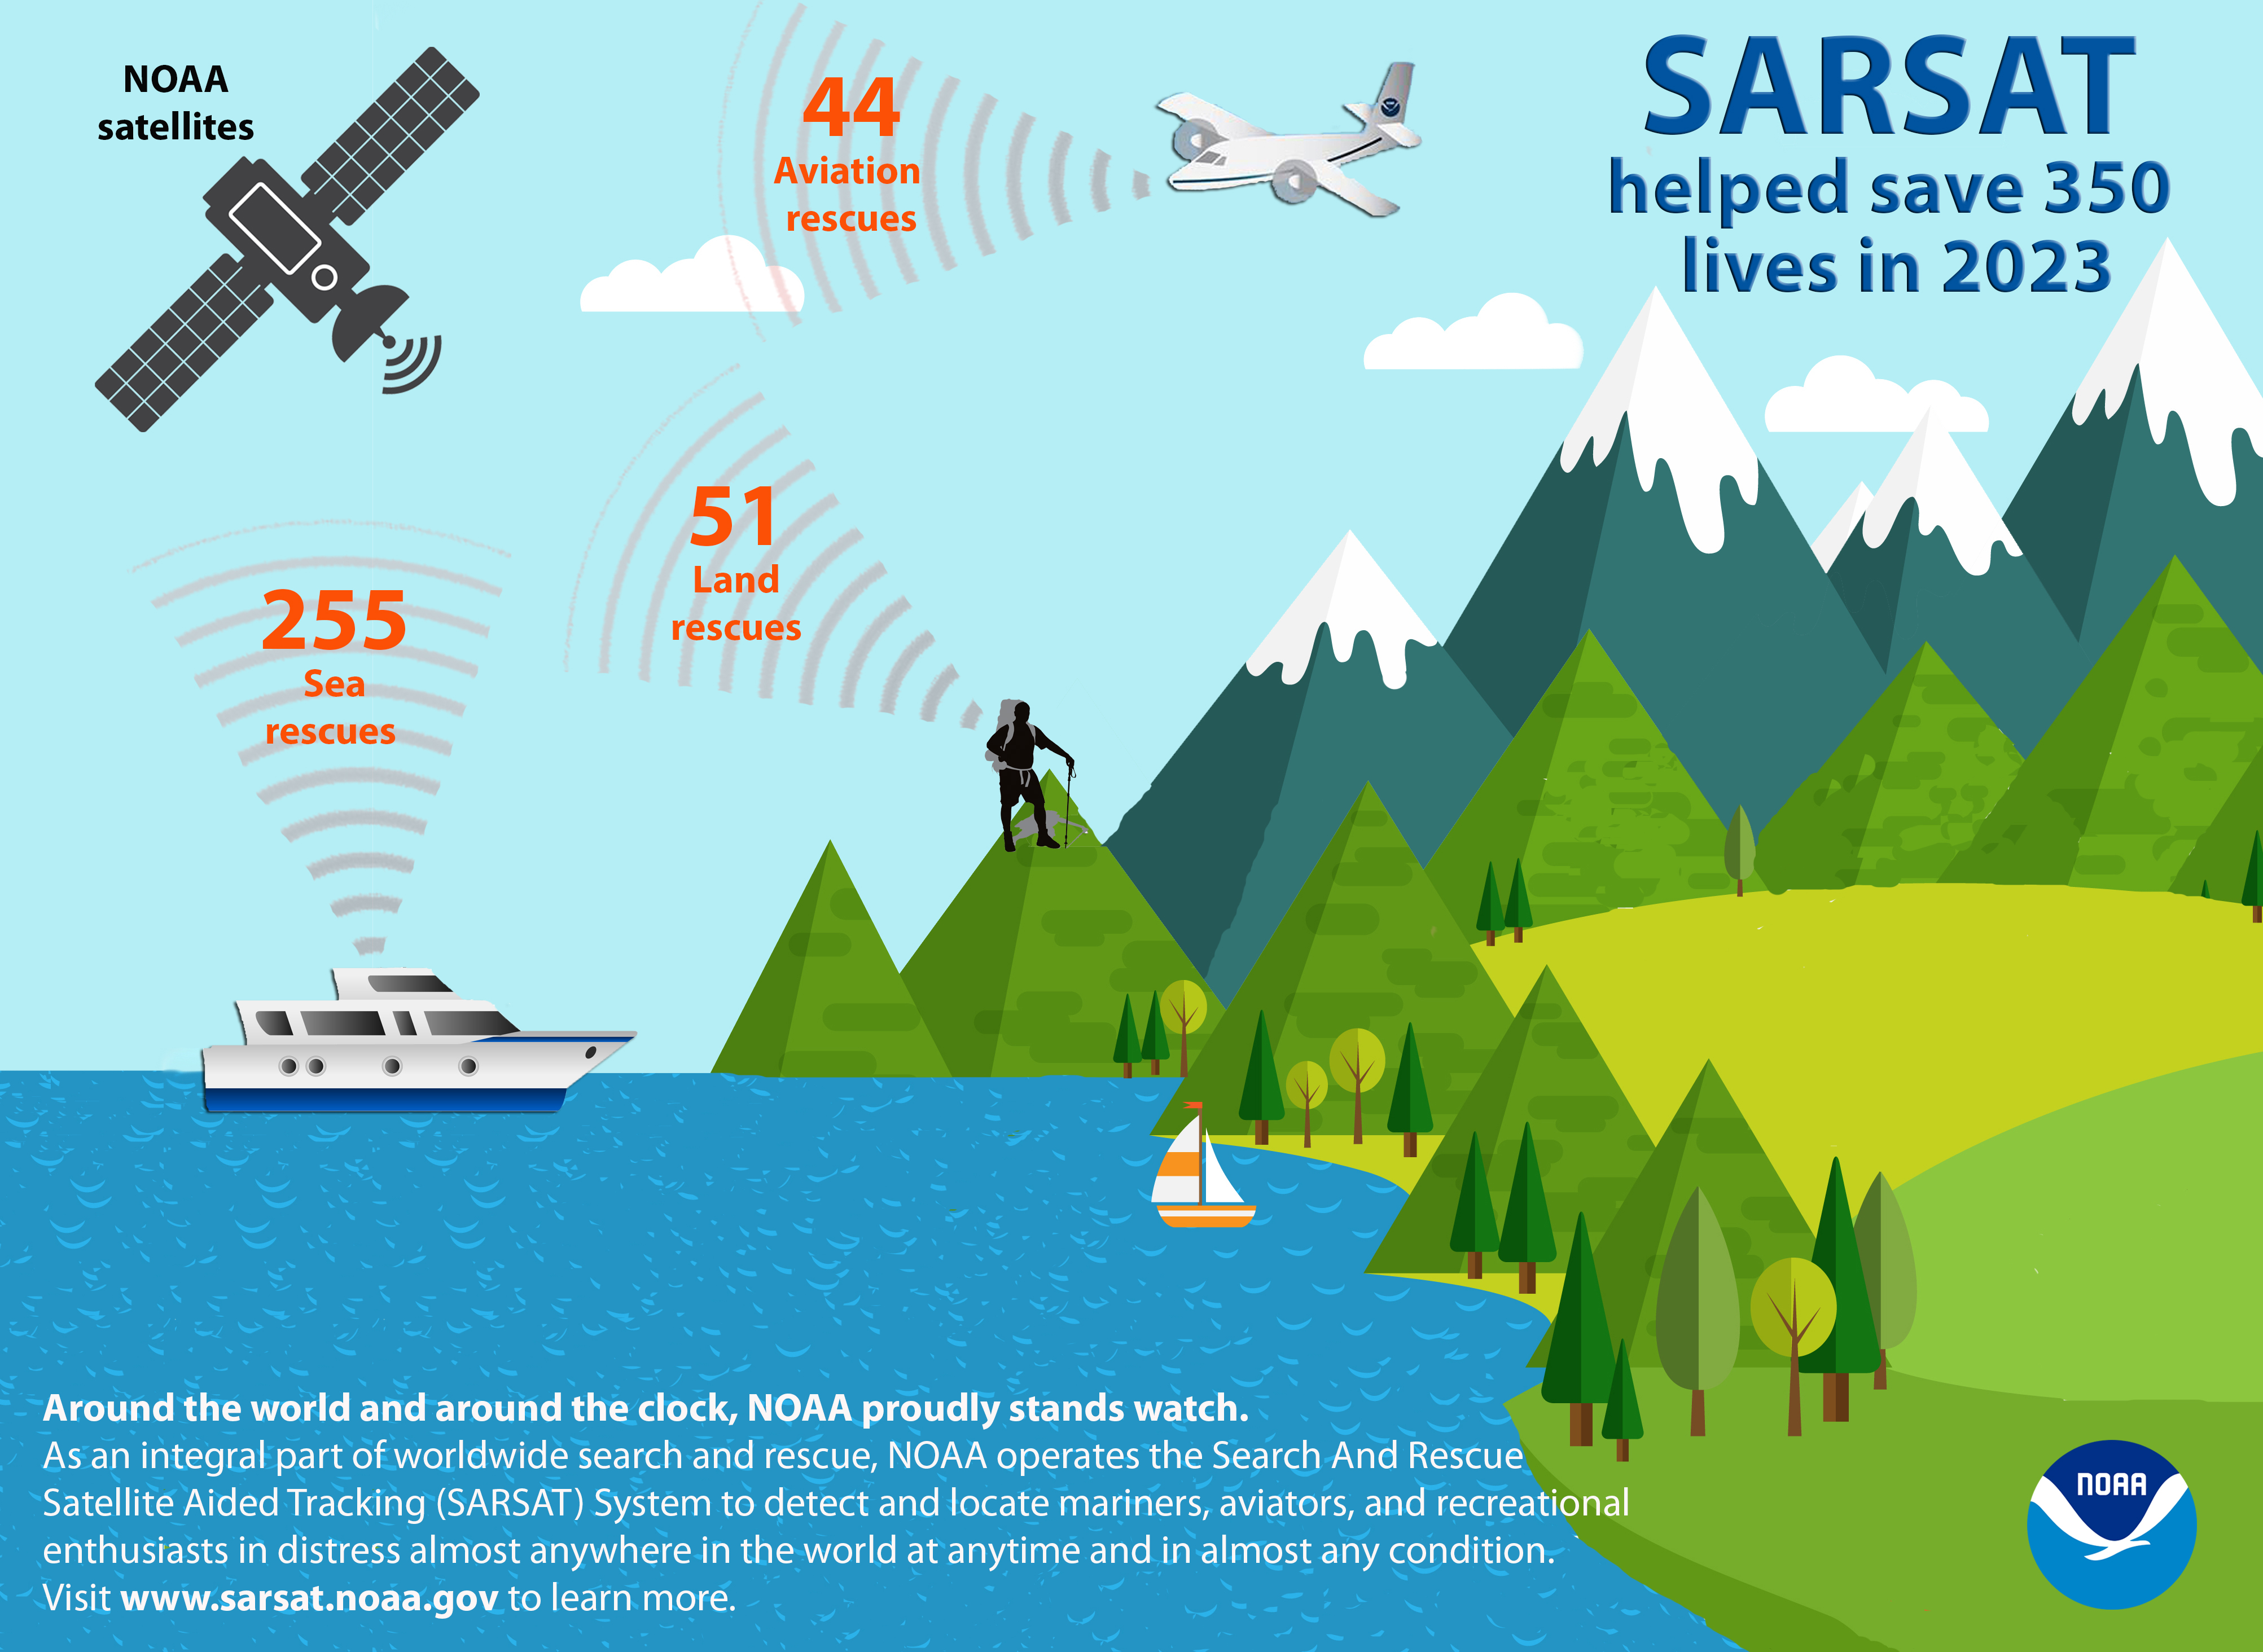 A graphic showing 3 categories of satellite-assisted rescues that took place in 2023: Of the 350 lives saved, 255 people were rescued at sea, 44 were rescued from aviation incidents and 51 were rescued from incidents on land. 